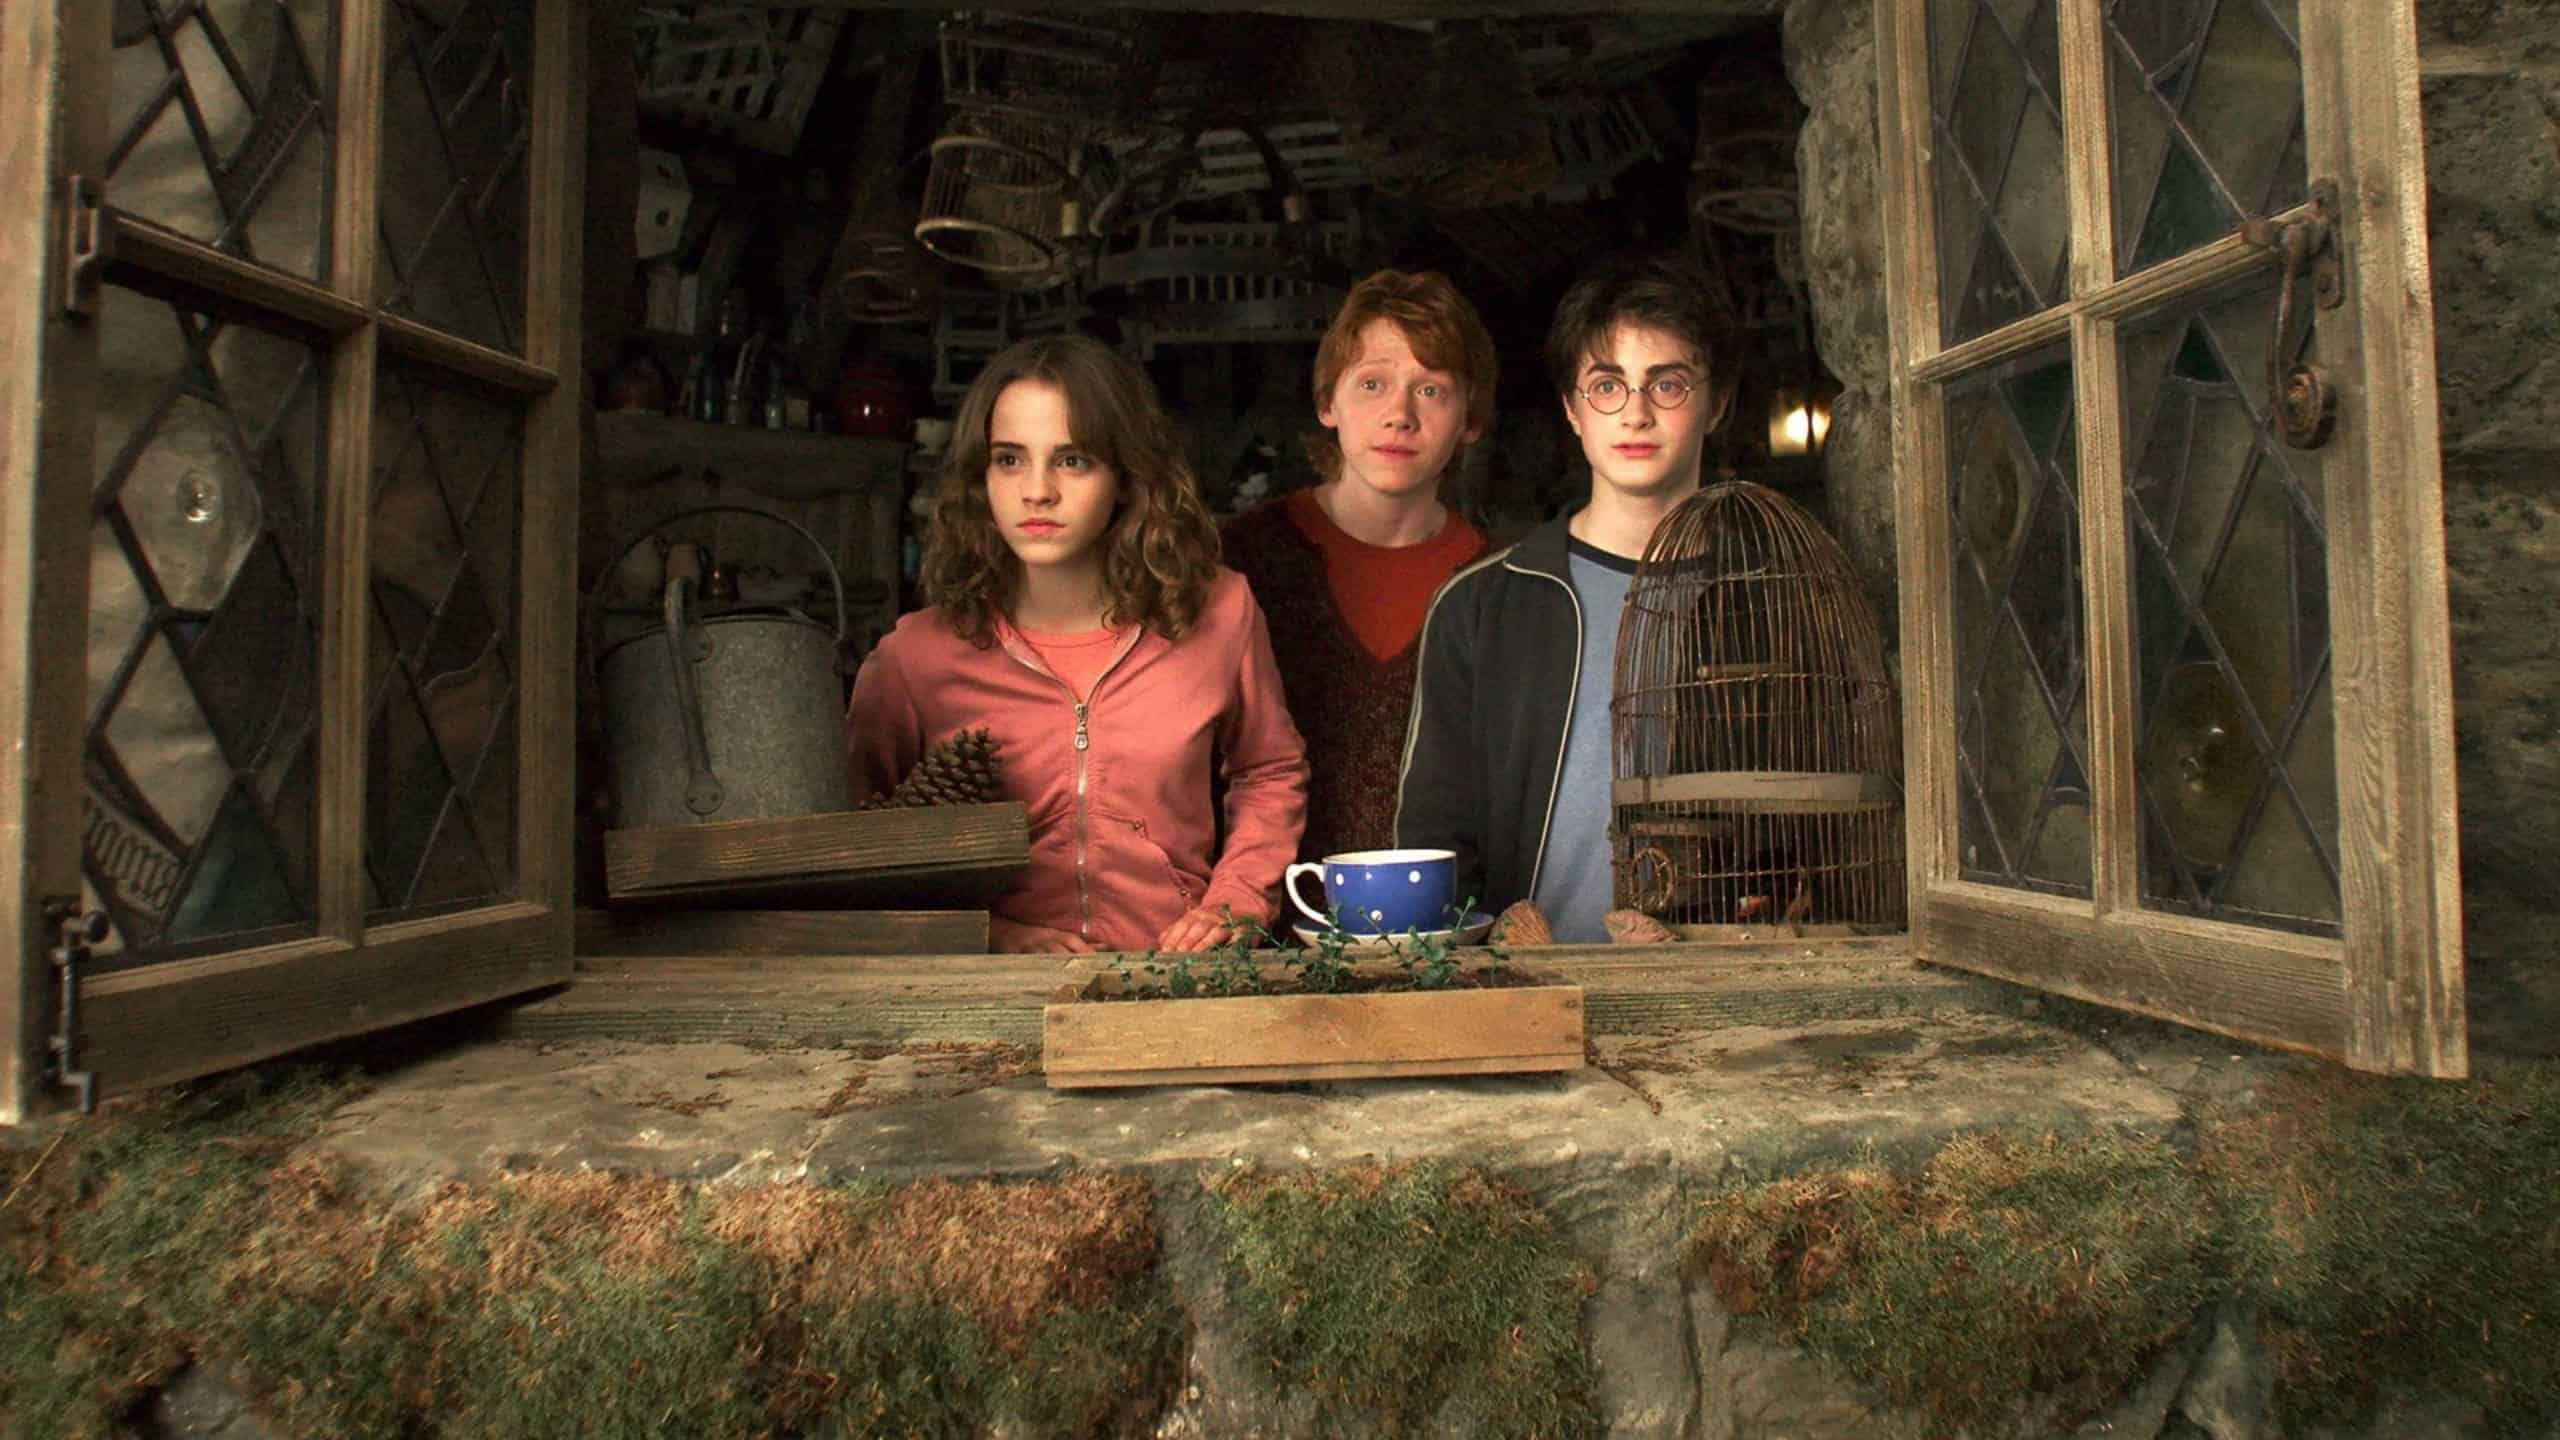 Harry, Hermione, and Ron